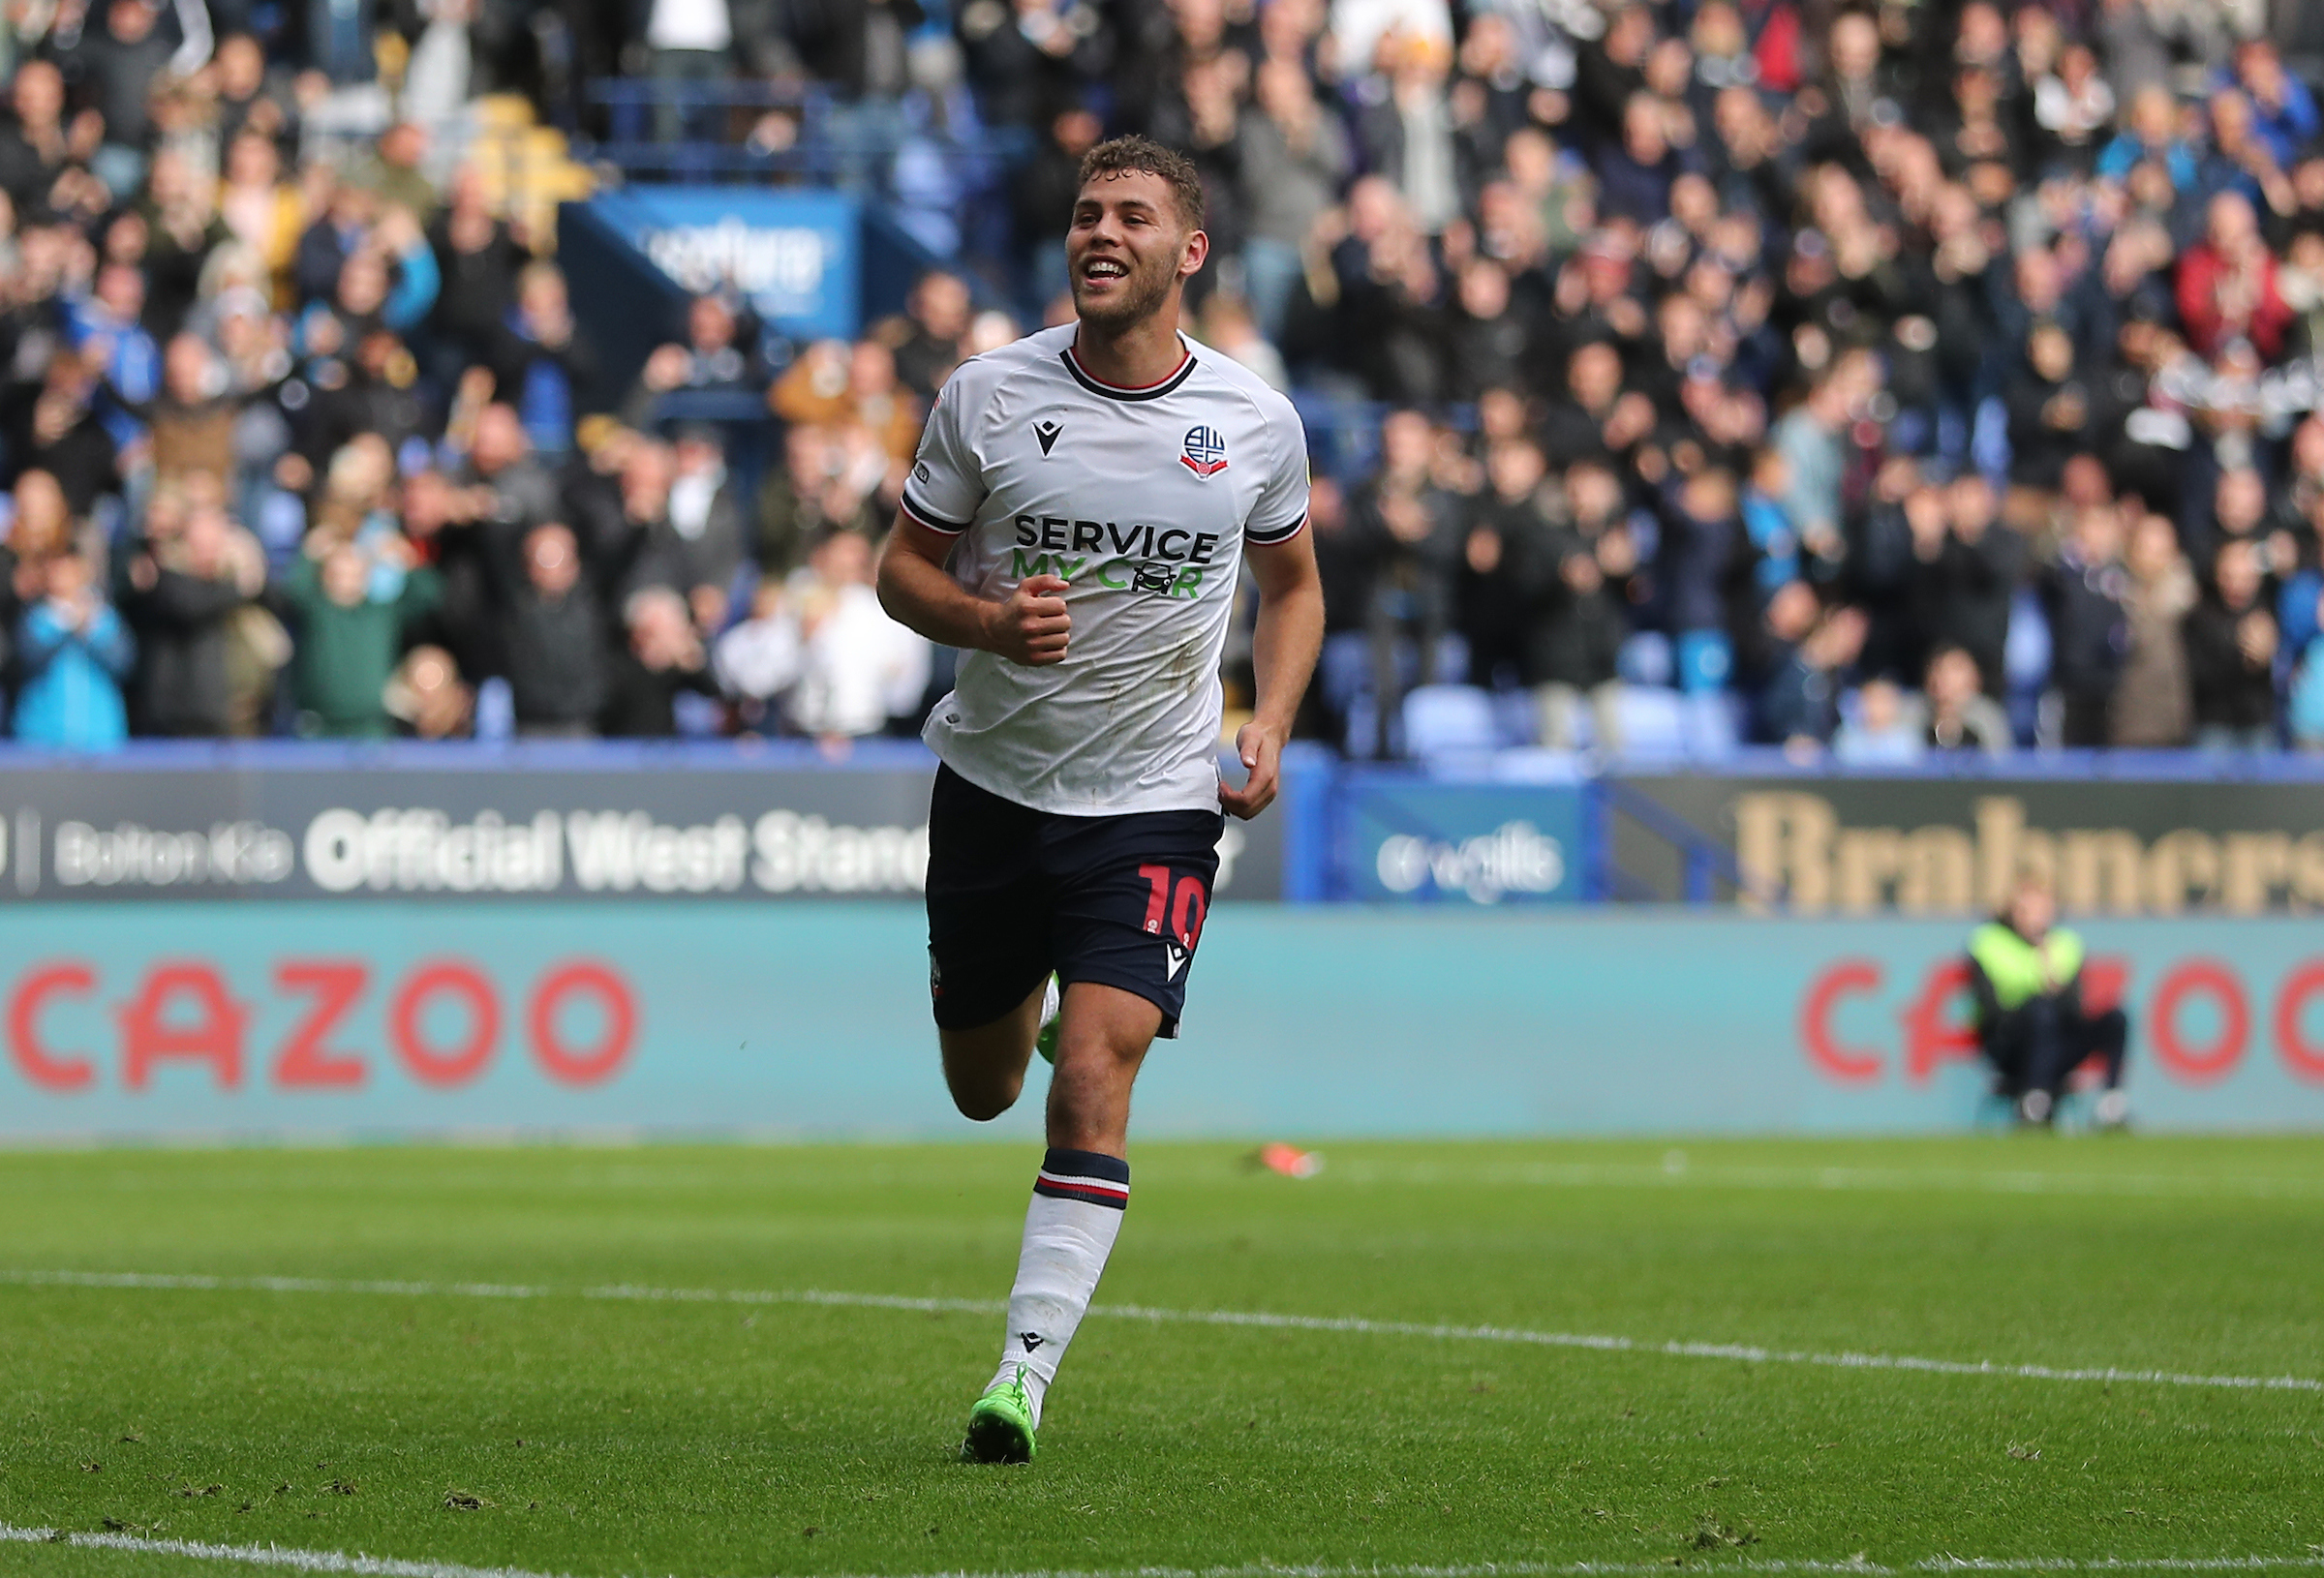 Pundits give verdict on Bolton Wanderers' 2-0 win against Lincoln City